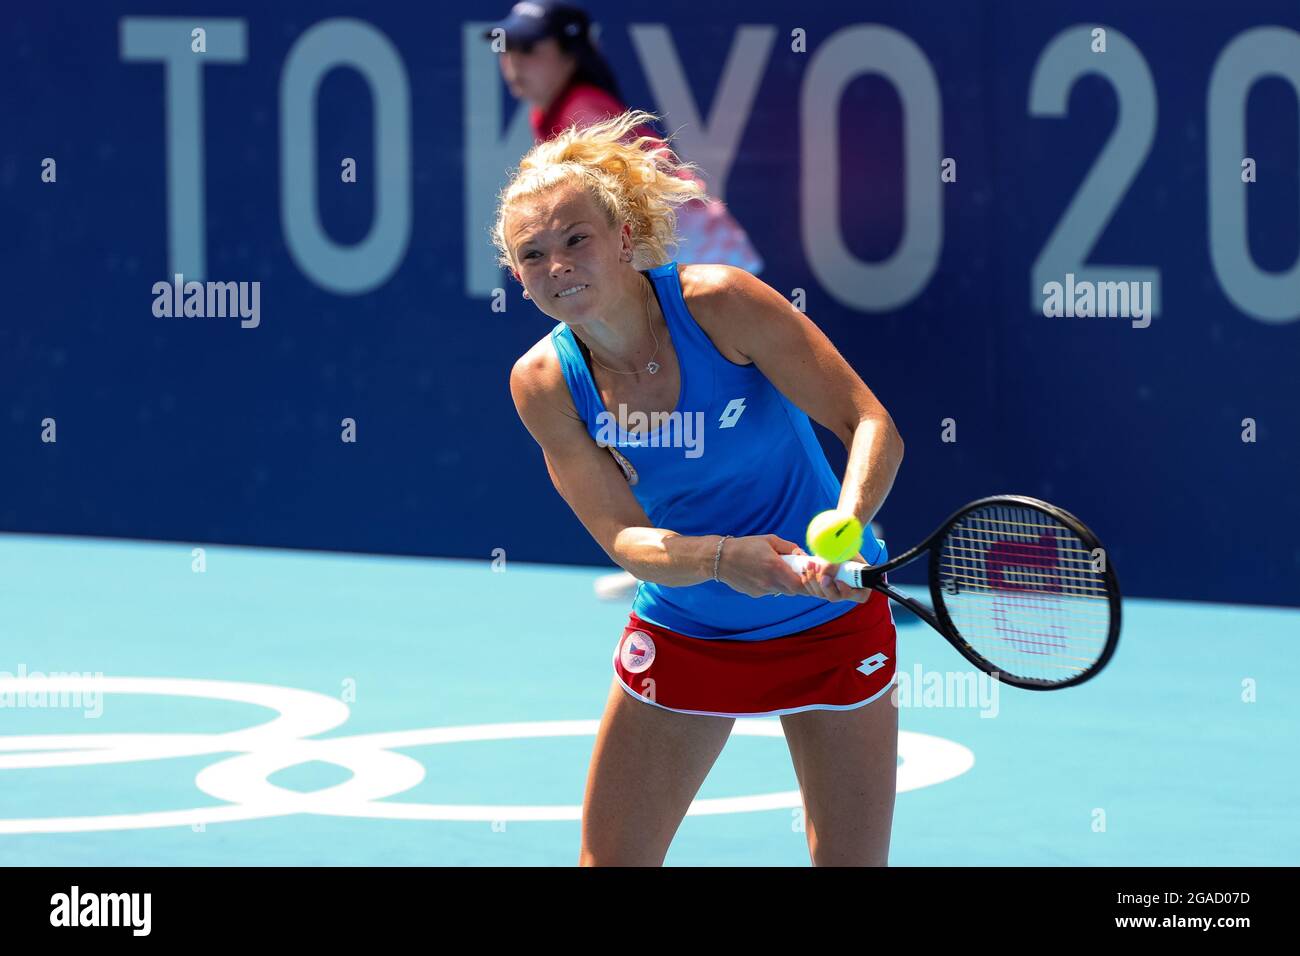 Tokyo, Japan, 28 July, 2021. Katerina Siniakova returns serve during the Women's Doubles Tennis Quarter Final match between Ash Barty and Storm Sanders of Australia and Barbora Krejcikova and Katerina Siniakova of Czech Republic on Day 5 of the Tokyo 2020 Olympic Games at Ariake Tennis Park on July 28, 2021 in Tokyo, Japan. (Photo by Pete Dovgan/Speed Media/Alamy Live News) Stock Photo